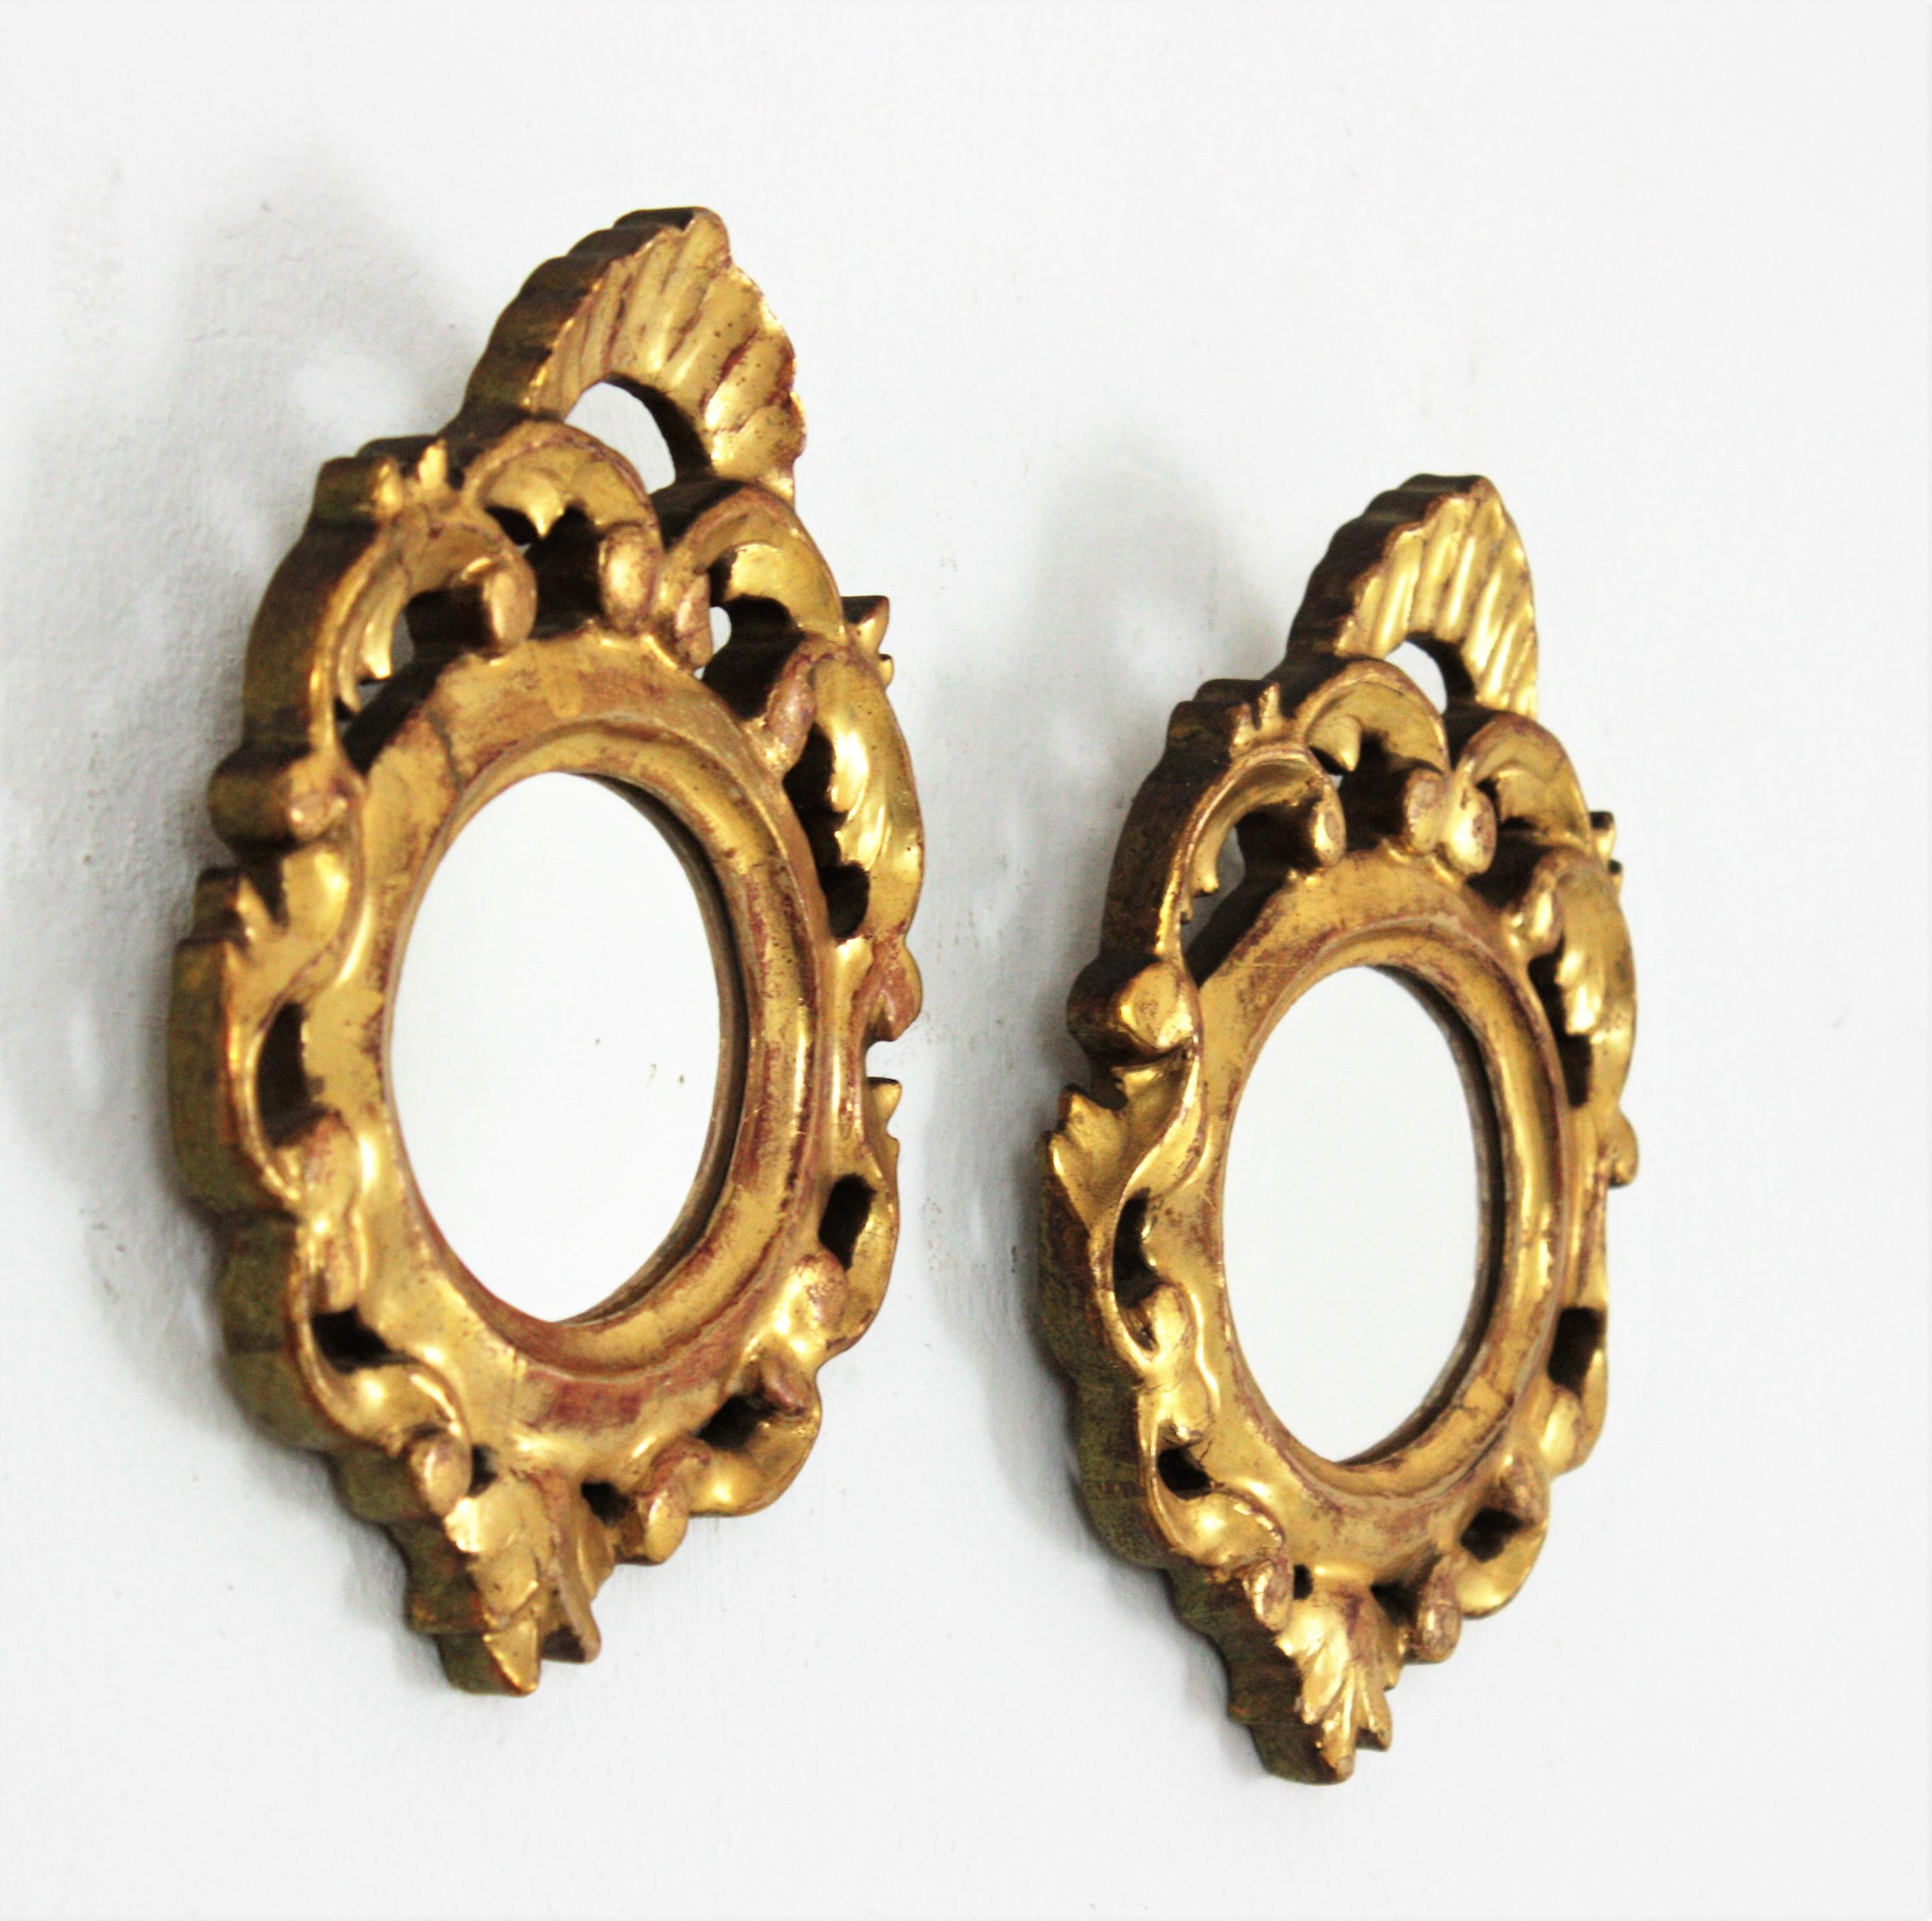 Rococo Style Carved Giltwood Miniature Wall Mirrors, Pair For Sale 3